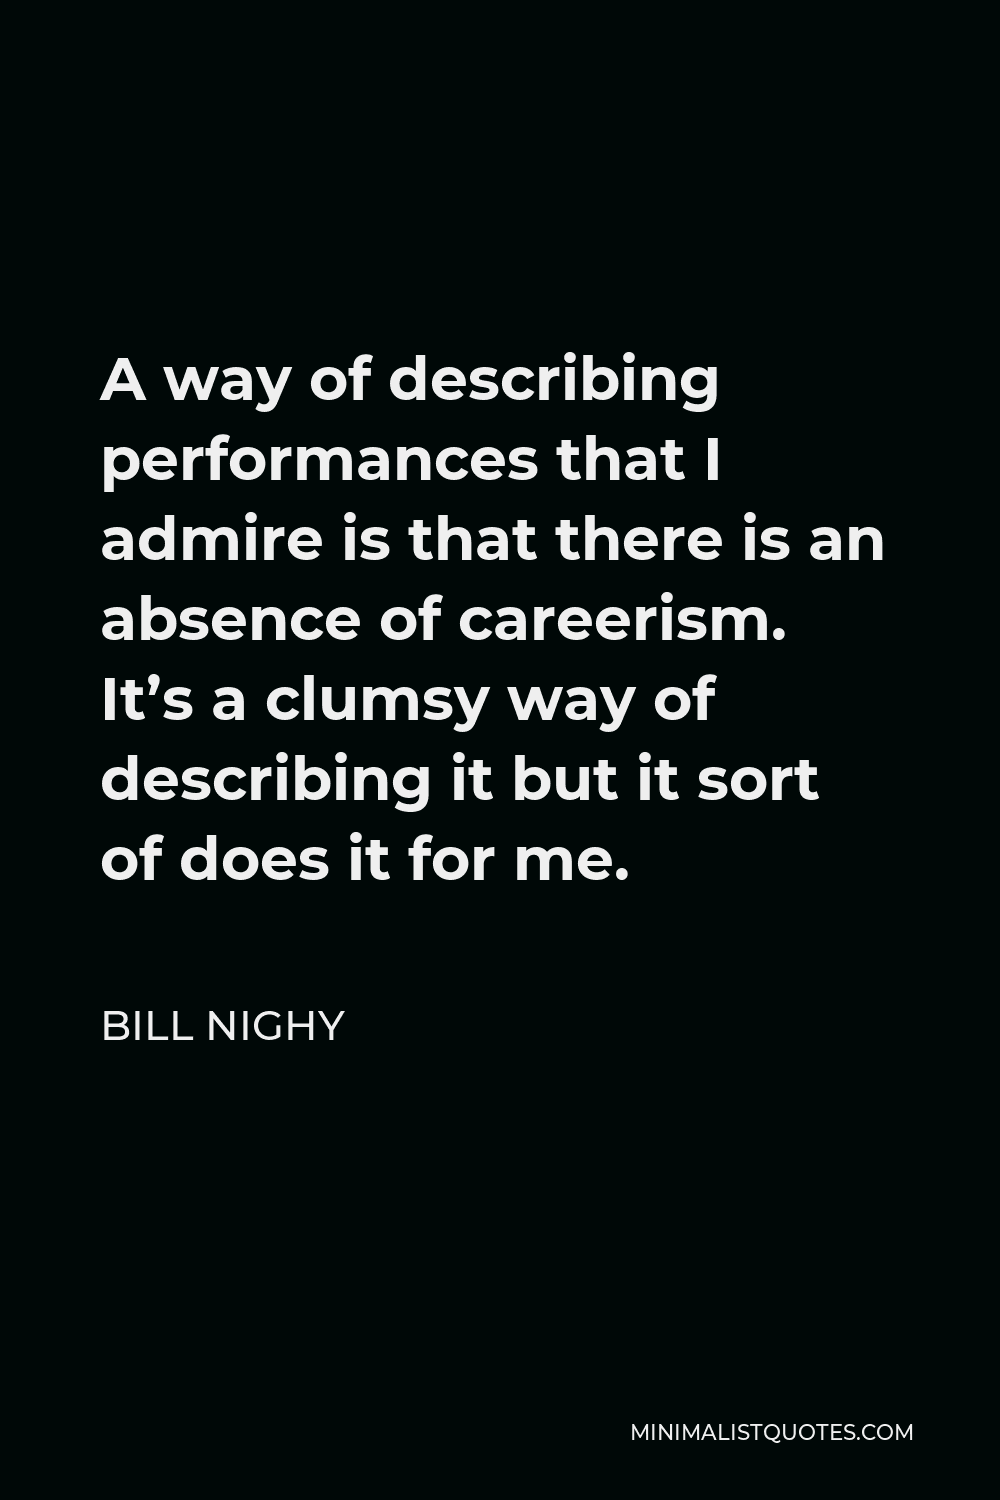 Bill Nighy Quote - A way of describing performances that I admire is that there is an absence of careerism. It’s a clumsy way of describing it but it sort of does it for me.